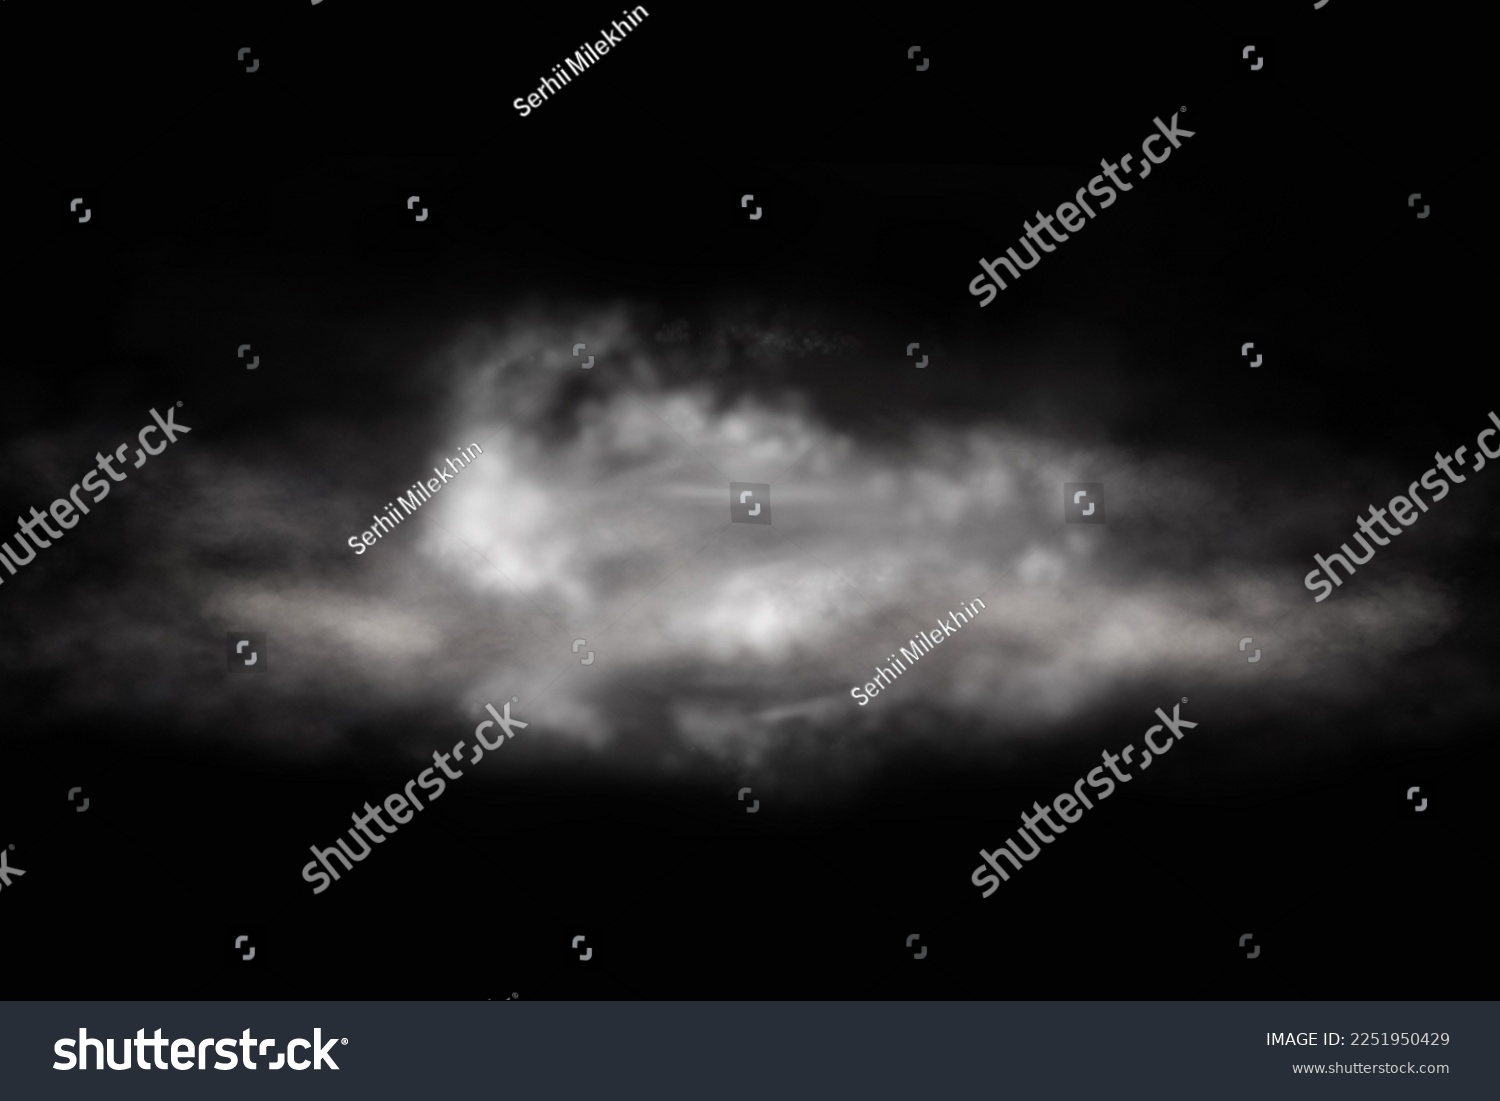 Abstract cloud of fog. Smoke overlay effect. Fog overlay effect. Smoke texture overlays. Misty effect. Isolated on black background.  #2251950429